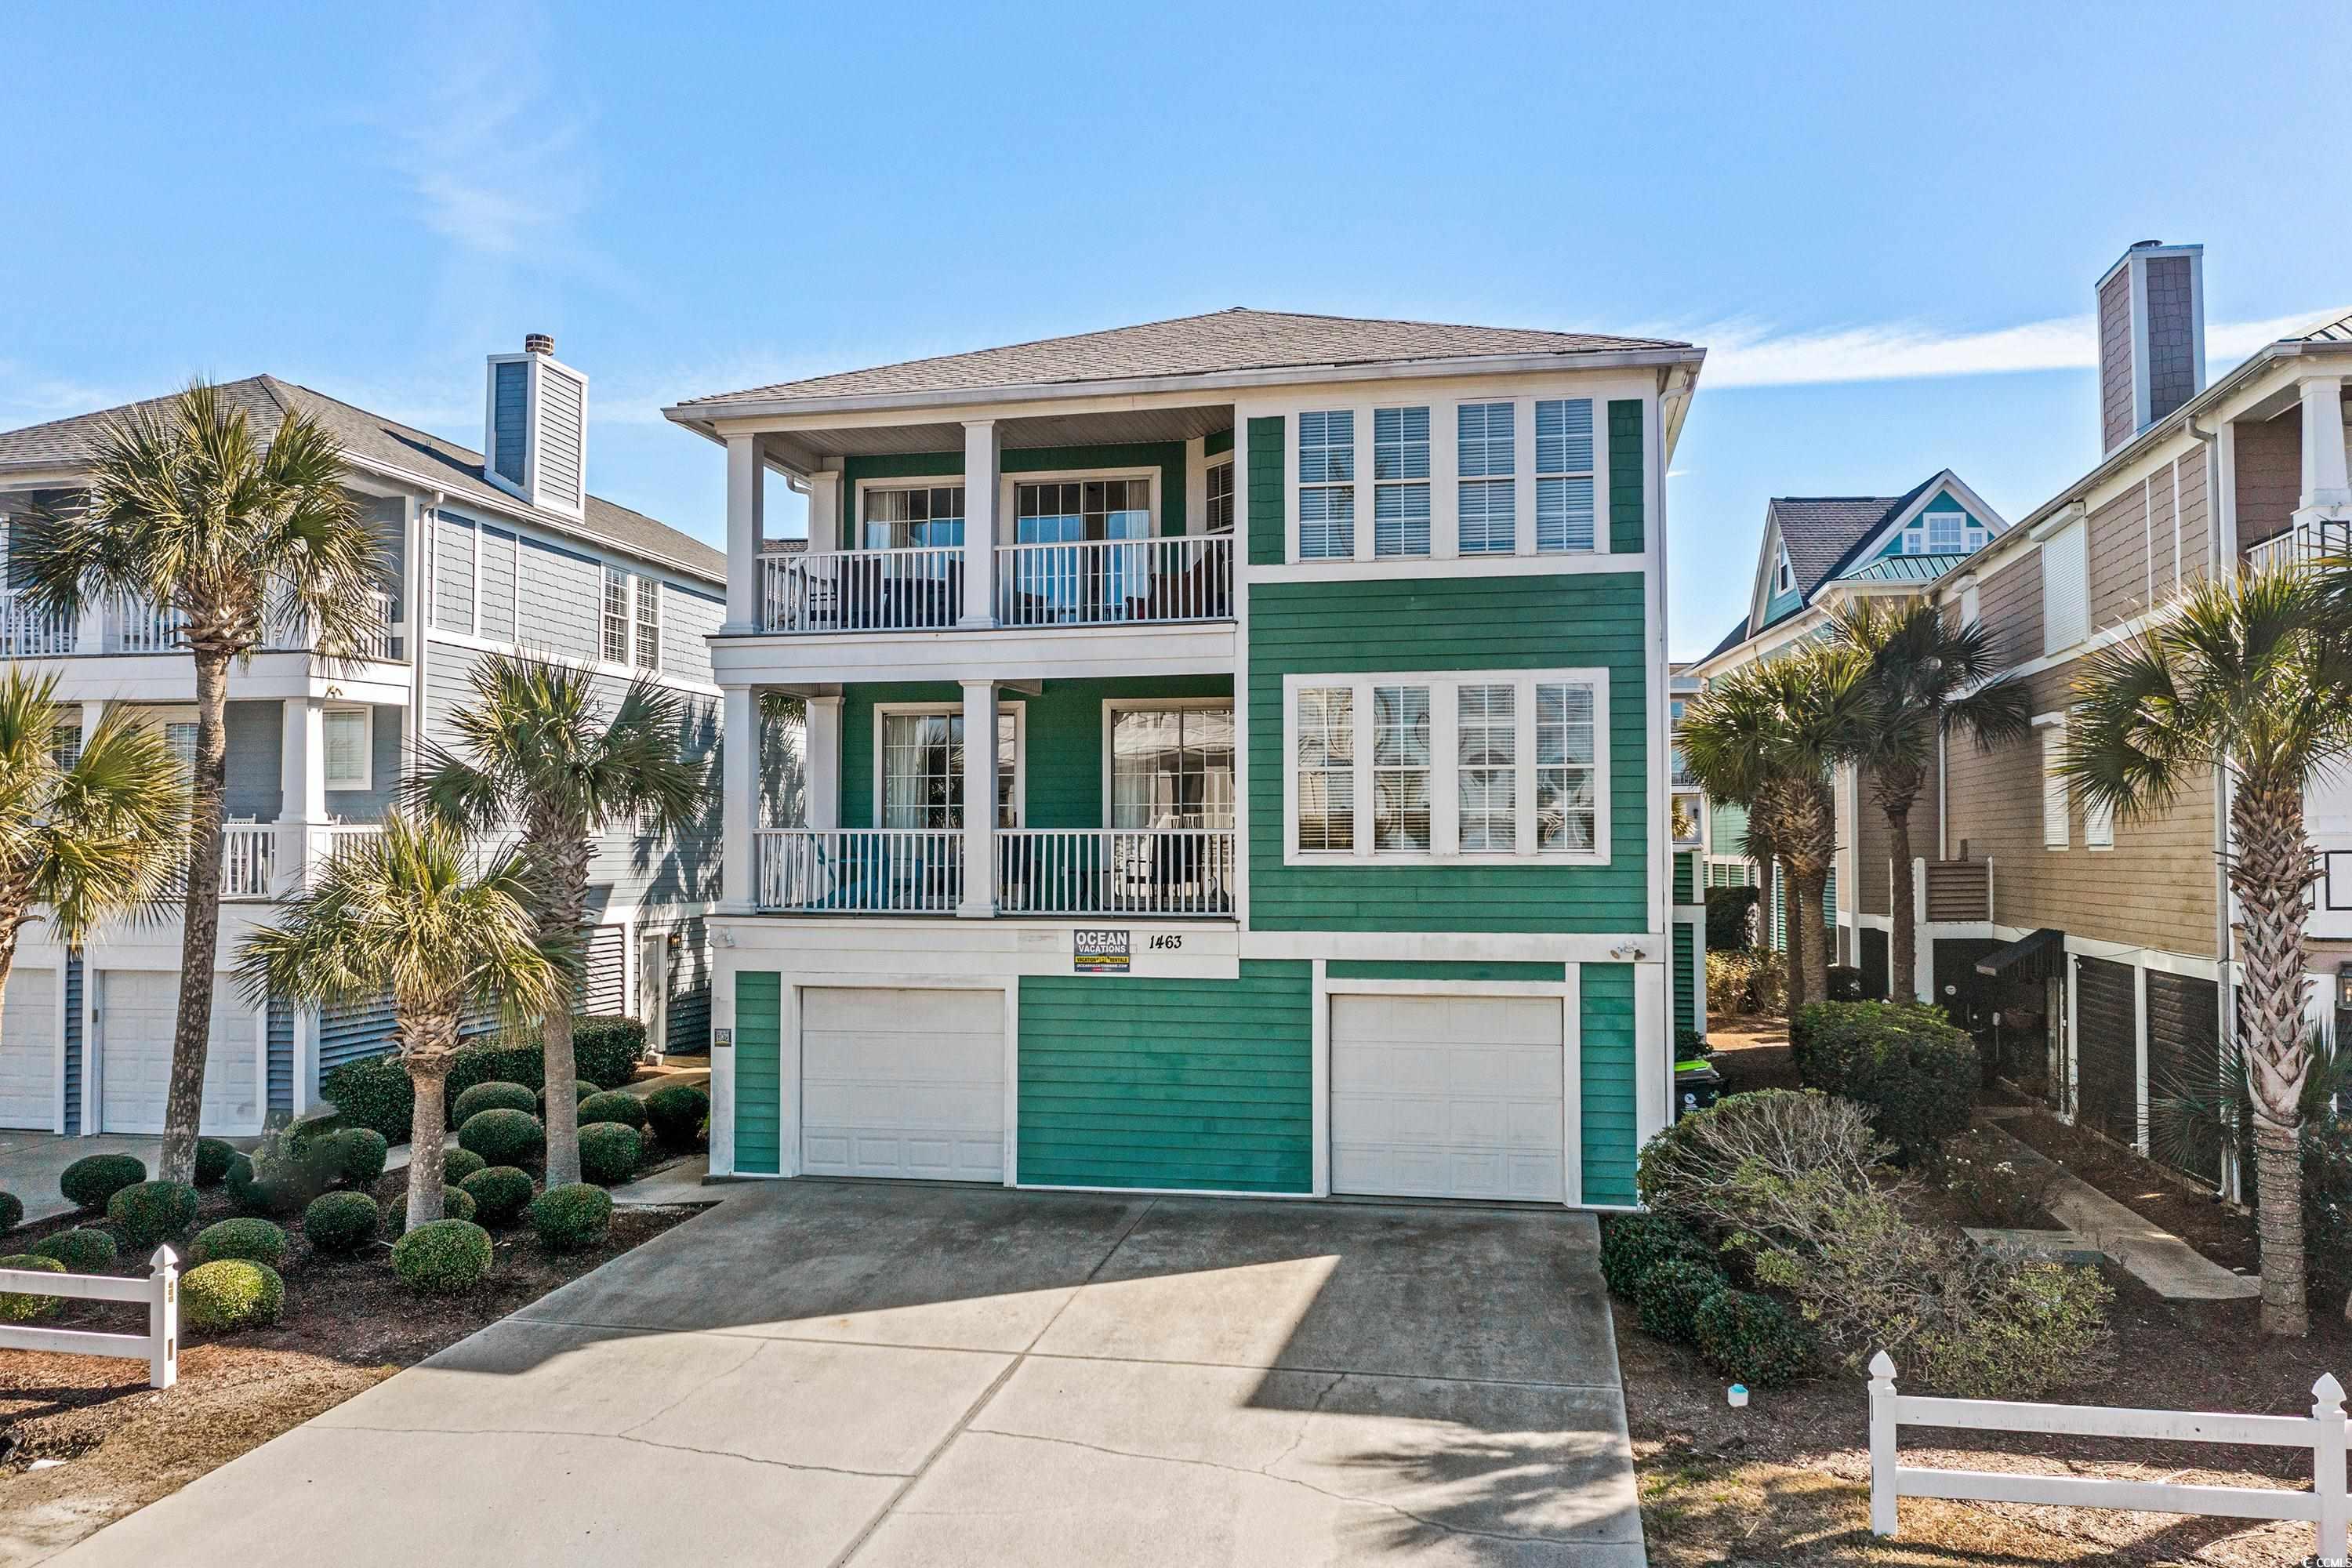 do not miss this meticulously kept murrells inlet home on the garden city beach peninsula.  a unique opportunity to own and enjoy this amazing and fully renovated 5 bedrooms and 6 baths home. wake up to breathtaking inlet views and peaks of the atlantic ocean. renovations were done in 2024! new luxury vinal flooring throughout, new granite countertops throughout the kitchen and all vanities, freshly painted and in mint condition!  the home offers bedrooms and inlet front double porches on both floors. enjoy the huge, enclosed garage space for all your vehicles & marine toys. offering an open floorplan concept on the main floor, a large living space and a gourmet kitchen overlooking the spectacular inlet views! there is a pre-built elevator shaft space (currently used as extra closet space) for a future elevator to be installed if you so desire. sold fully furnished! only a few steps from the shared seaport village pool, gorgeous triple dune line beach, marlin quay marina and award-winning gulfstream café!  beach access boardwalk 2 house lengths away. short term and long-term rentals are allowed. hoa fees include exterior hazard insurance, flood insurance, trash pickup, water, sewer, quarterly pest control, common areas, pool & yard maintenance /landscaping. schedule your showing appointment today.